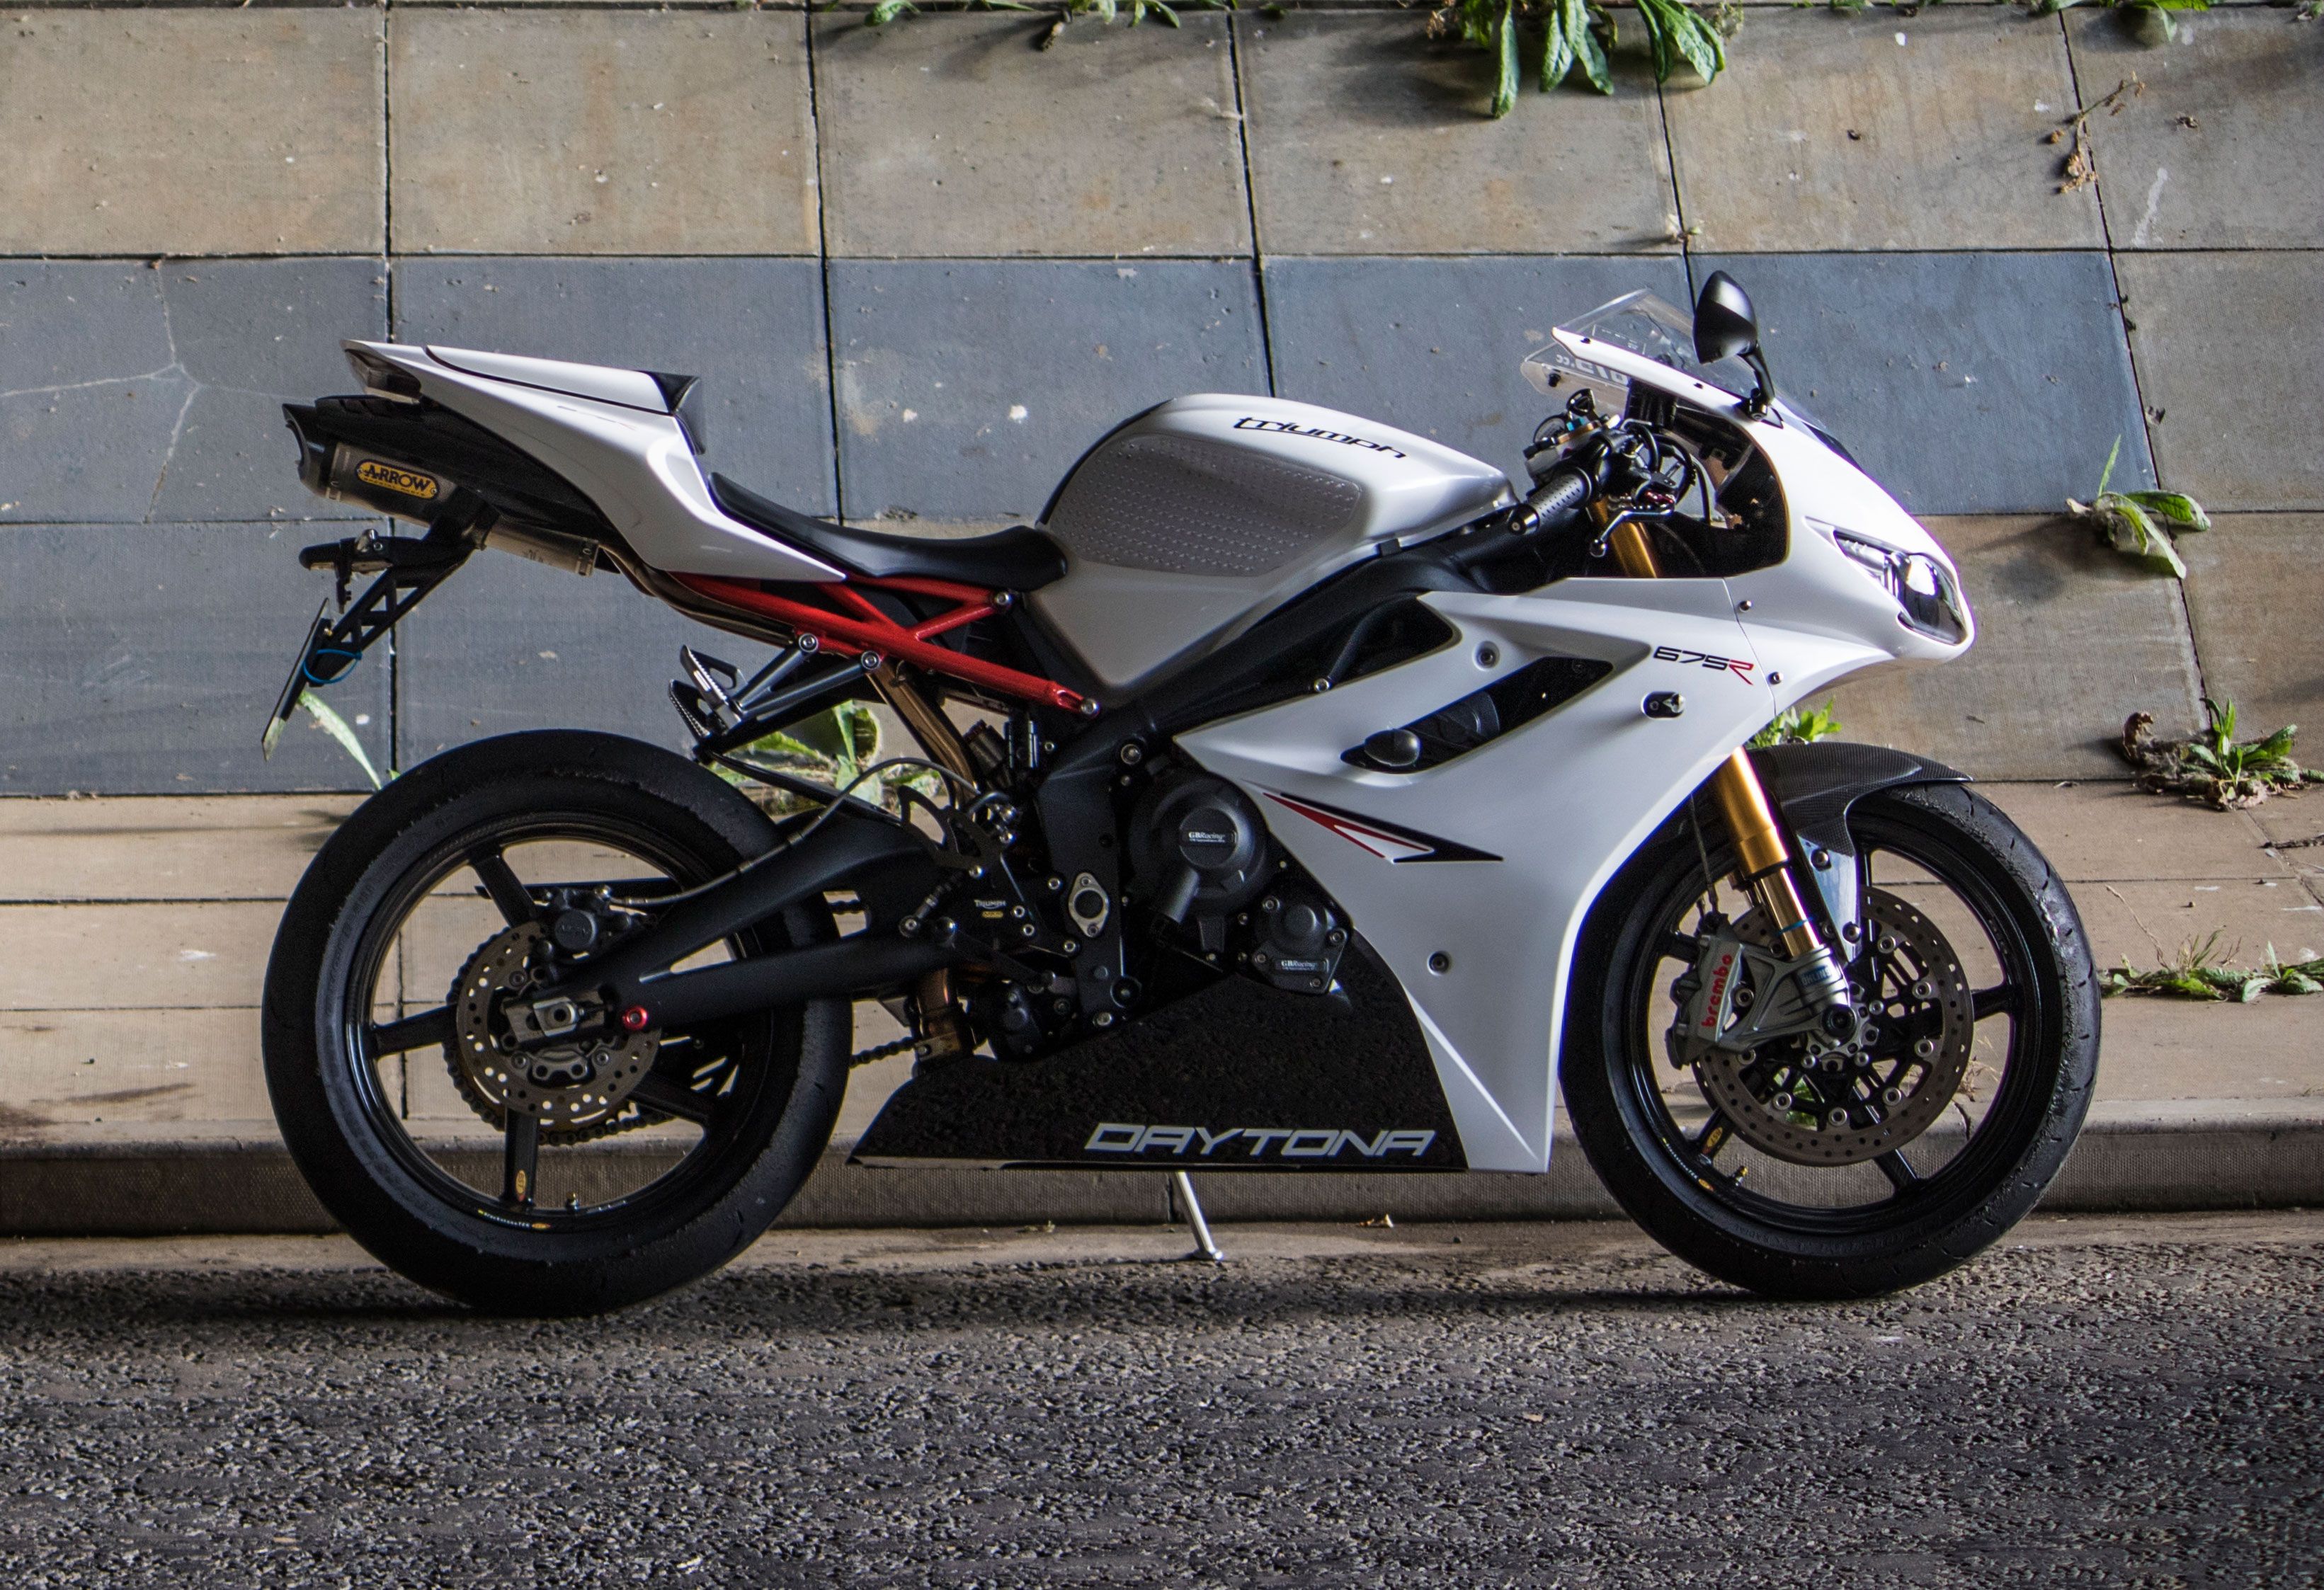 Triumph Daytona 675R motorcycle in white and red